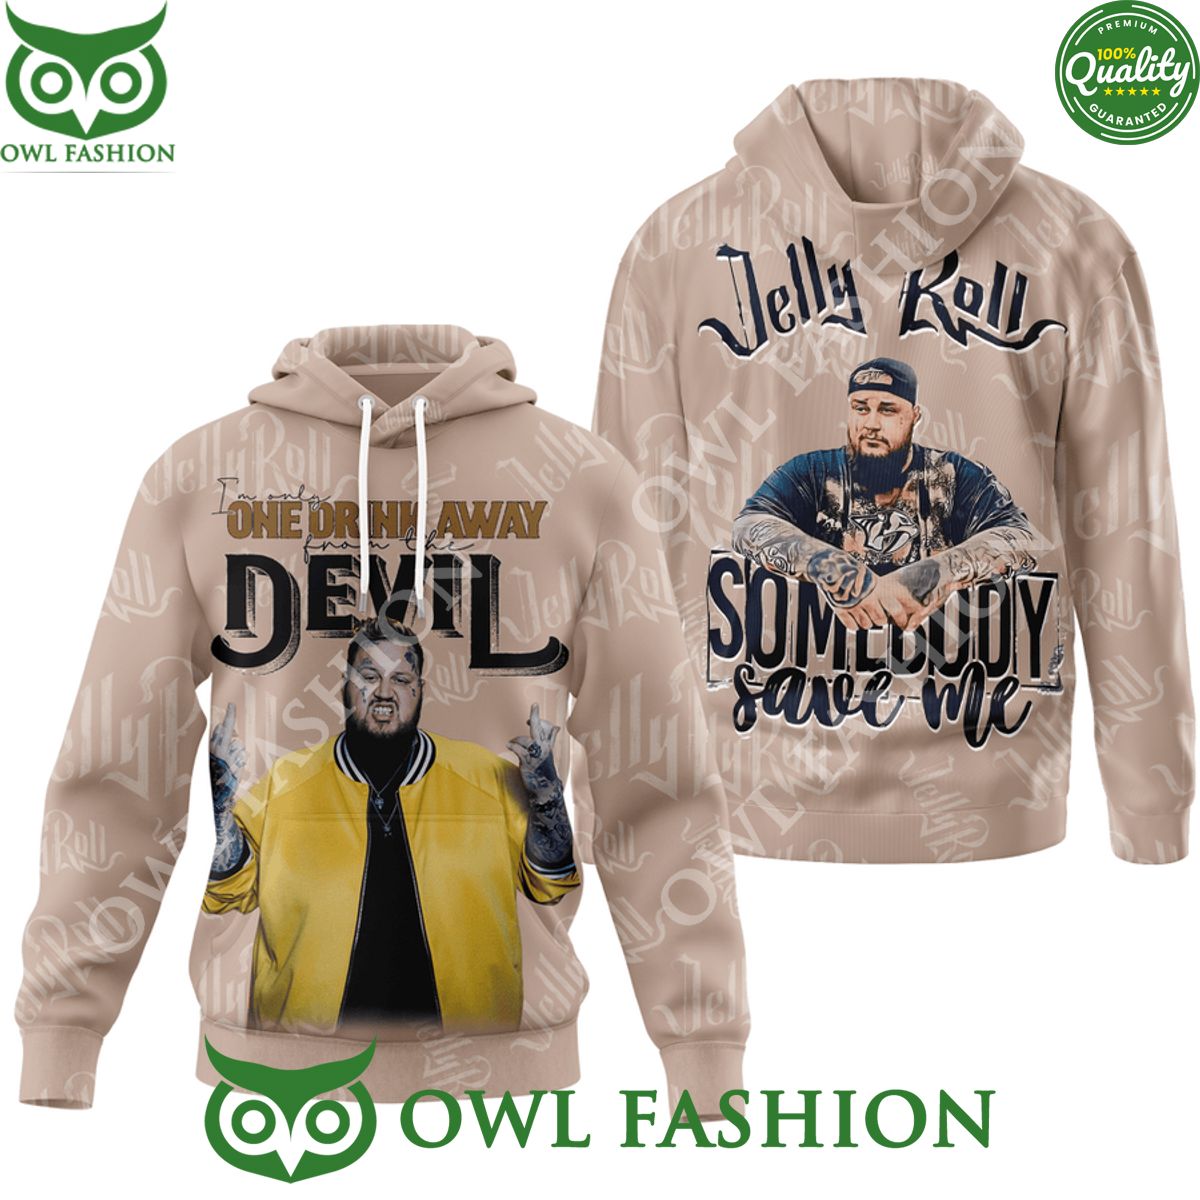 Jelly Roll One Drink Away Devil Somebody save me 3d printed Hoodie